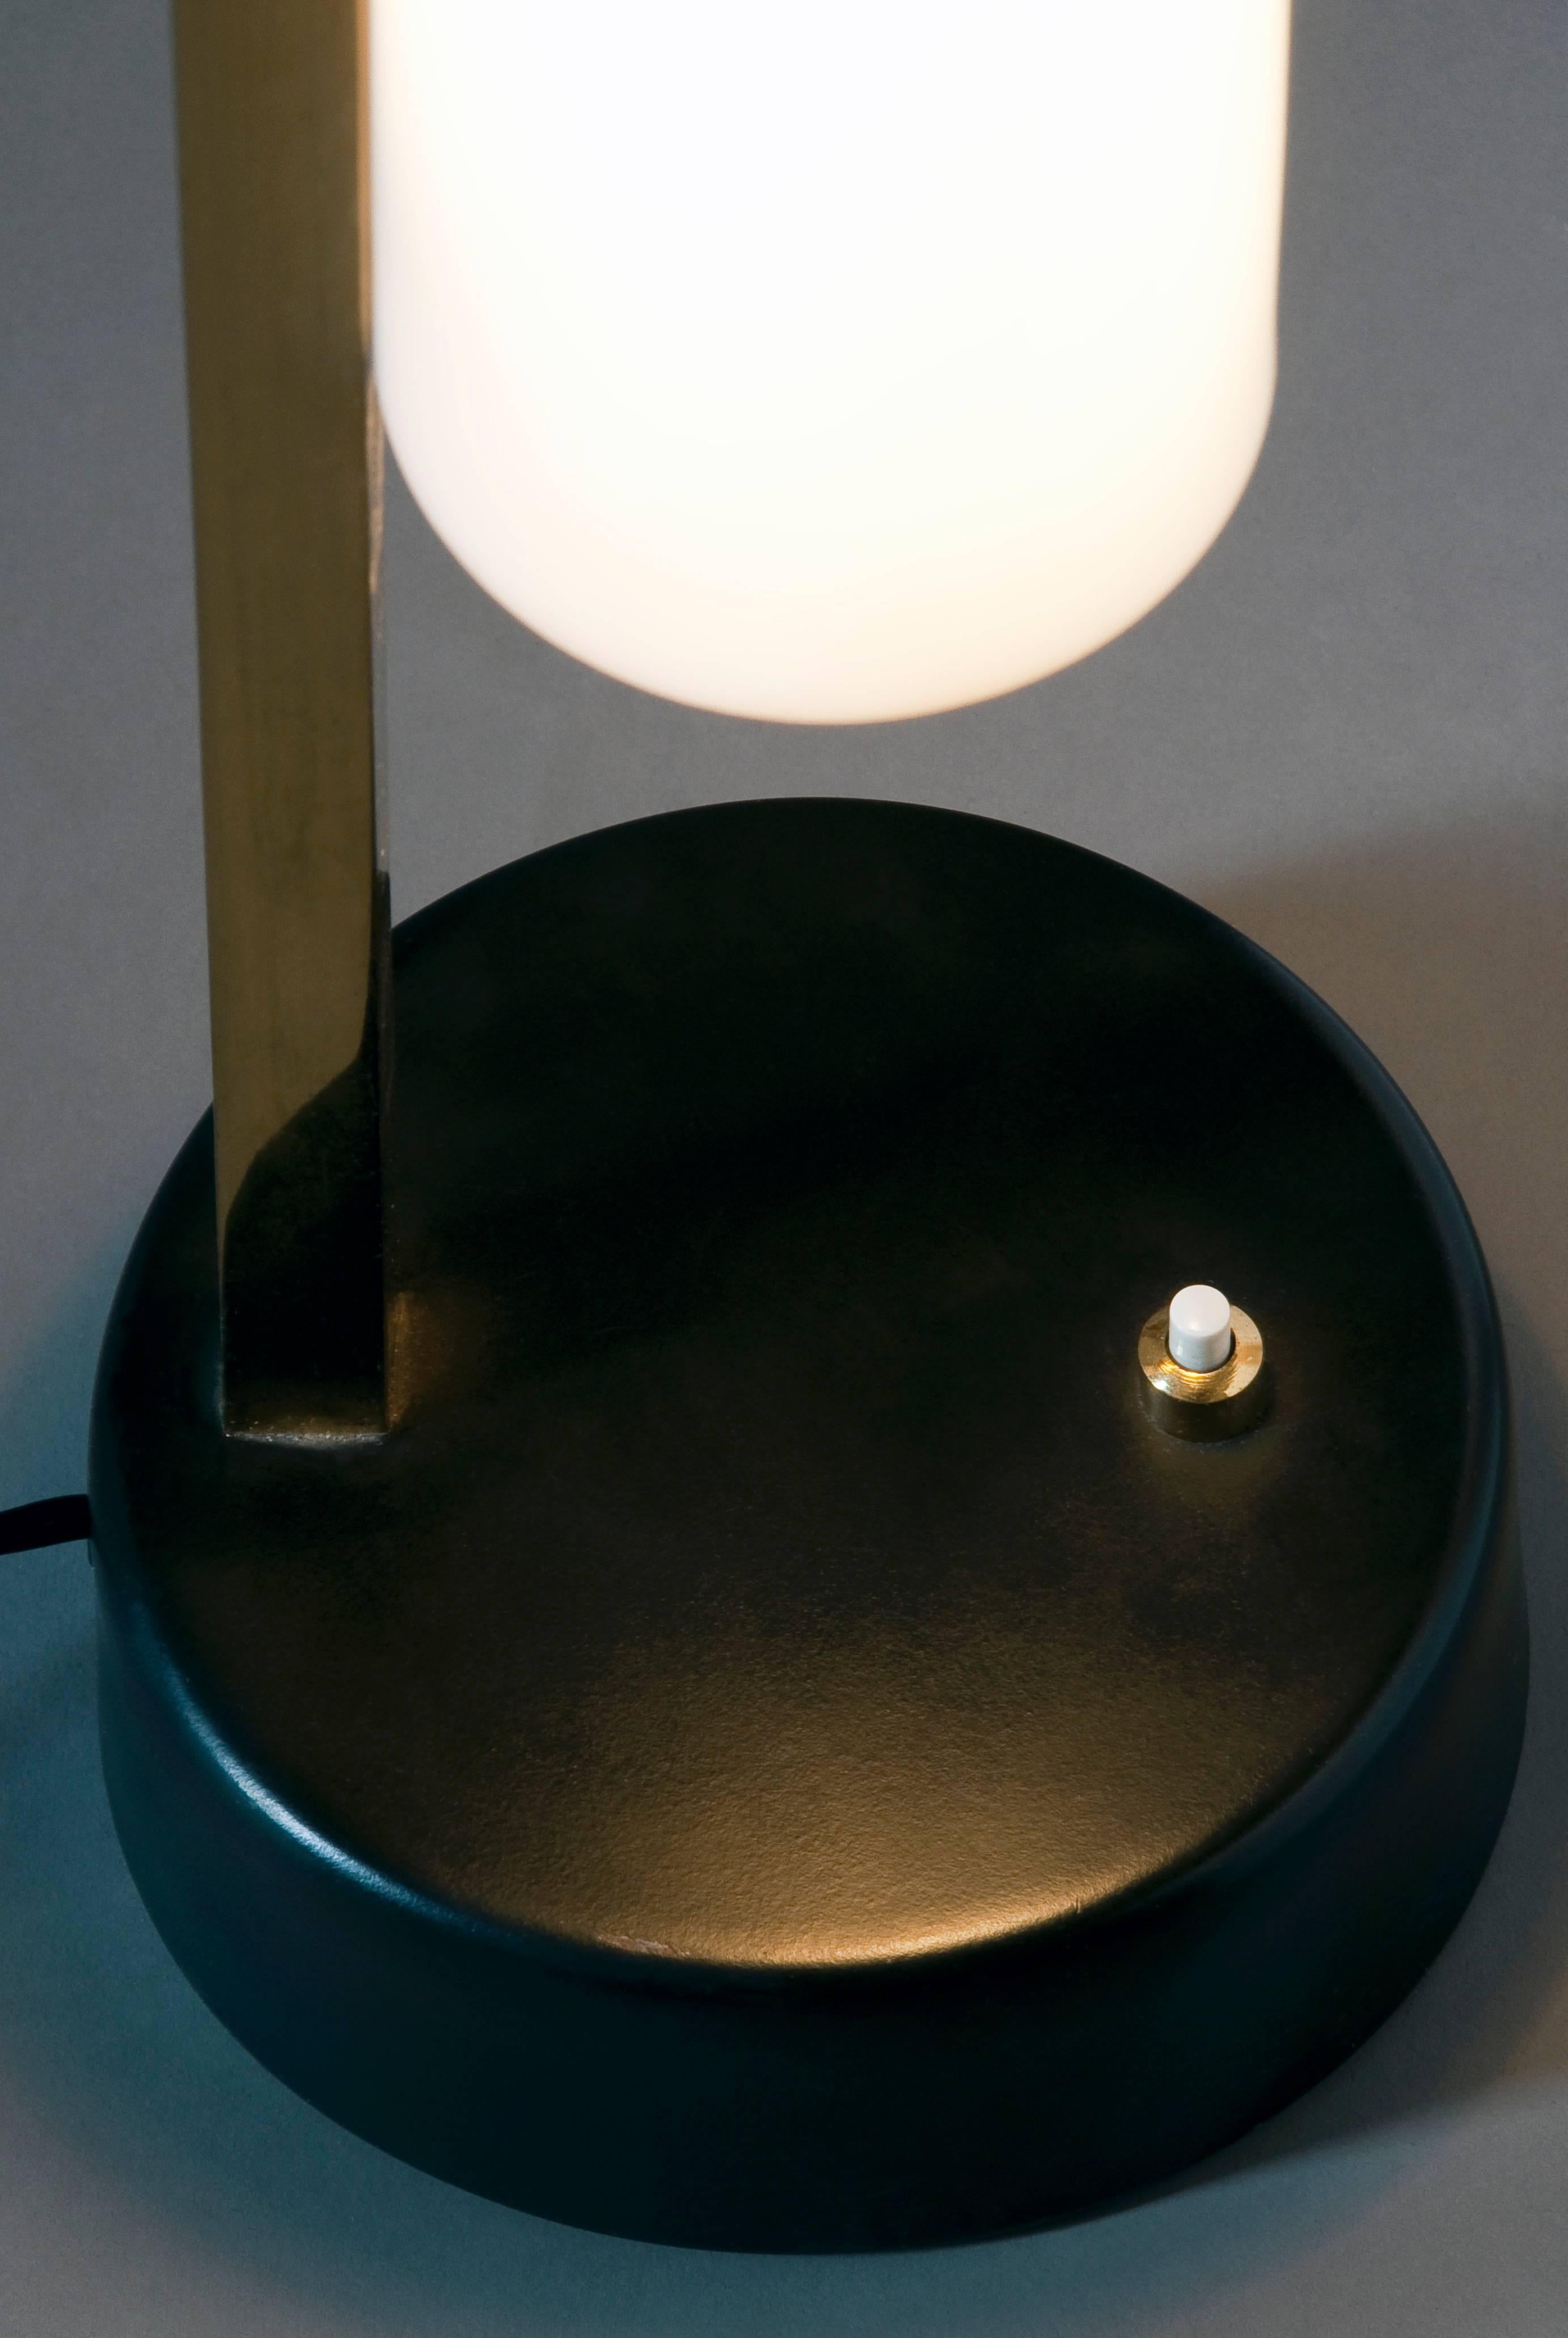 Floor lamp G54 by Pierre Guariche (1926-1995)
Pierre Disderot edition - 1959

One of the very last light designed by Pierre Guariche.